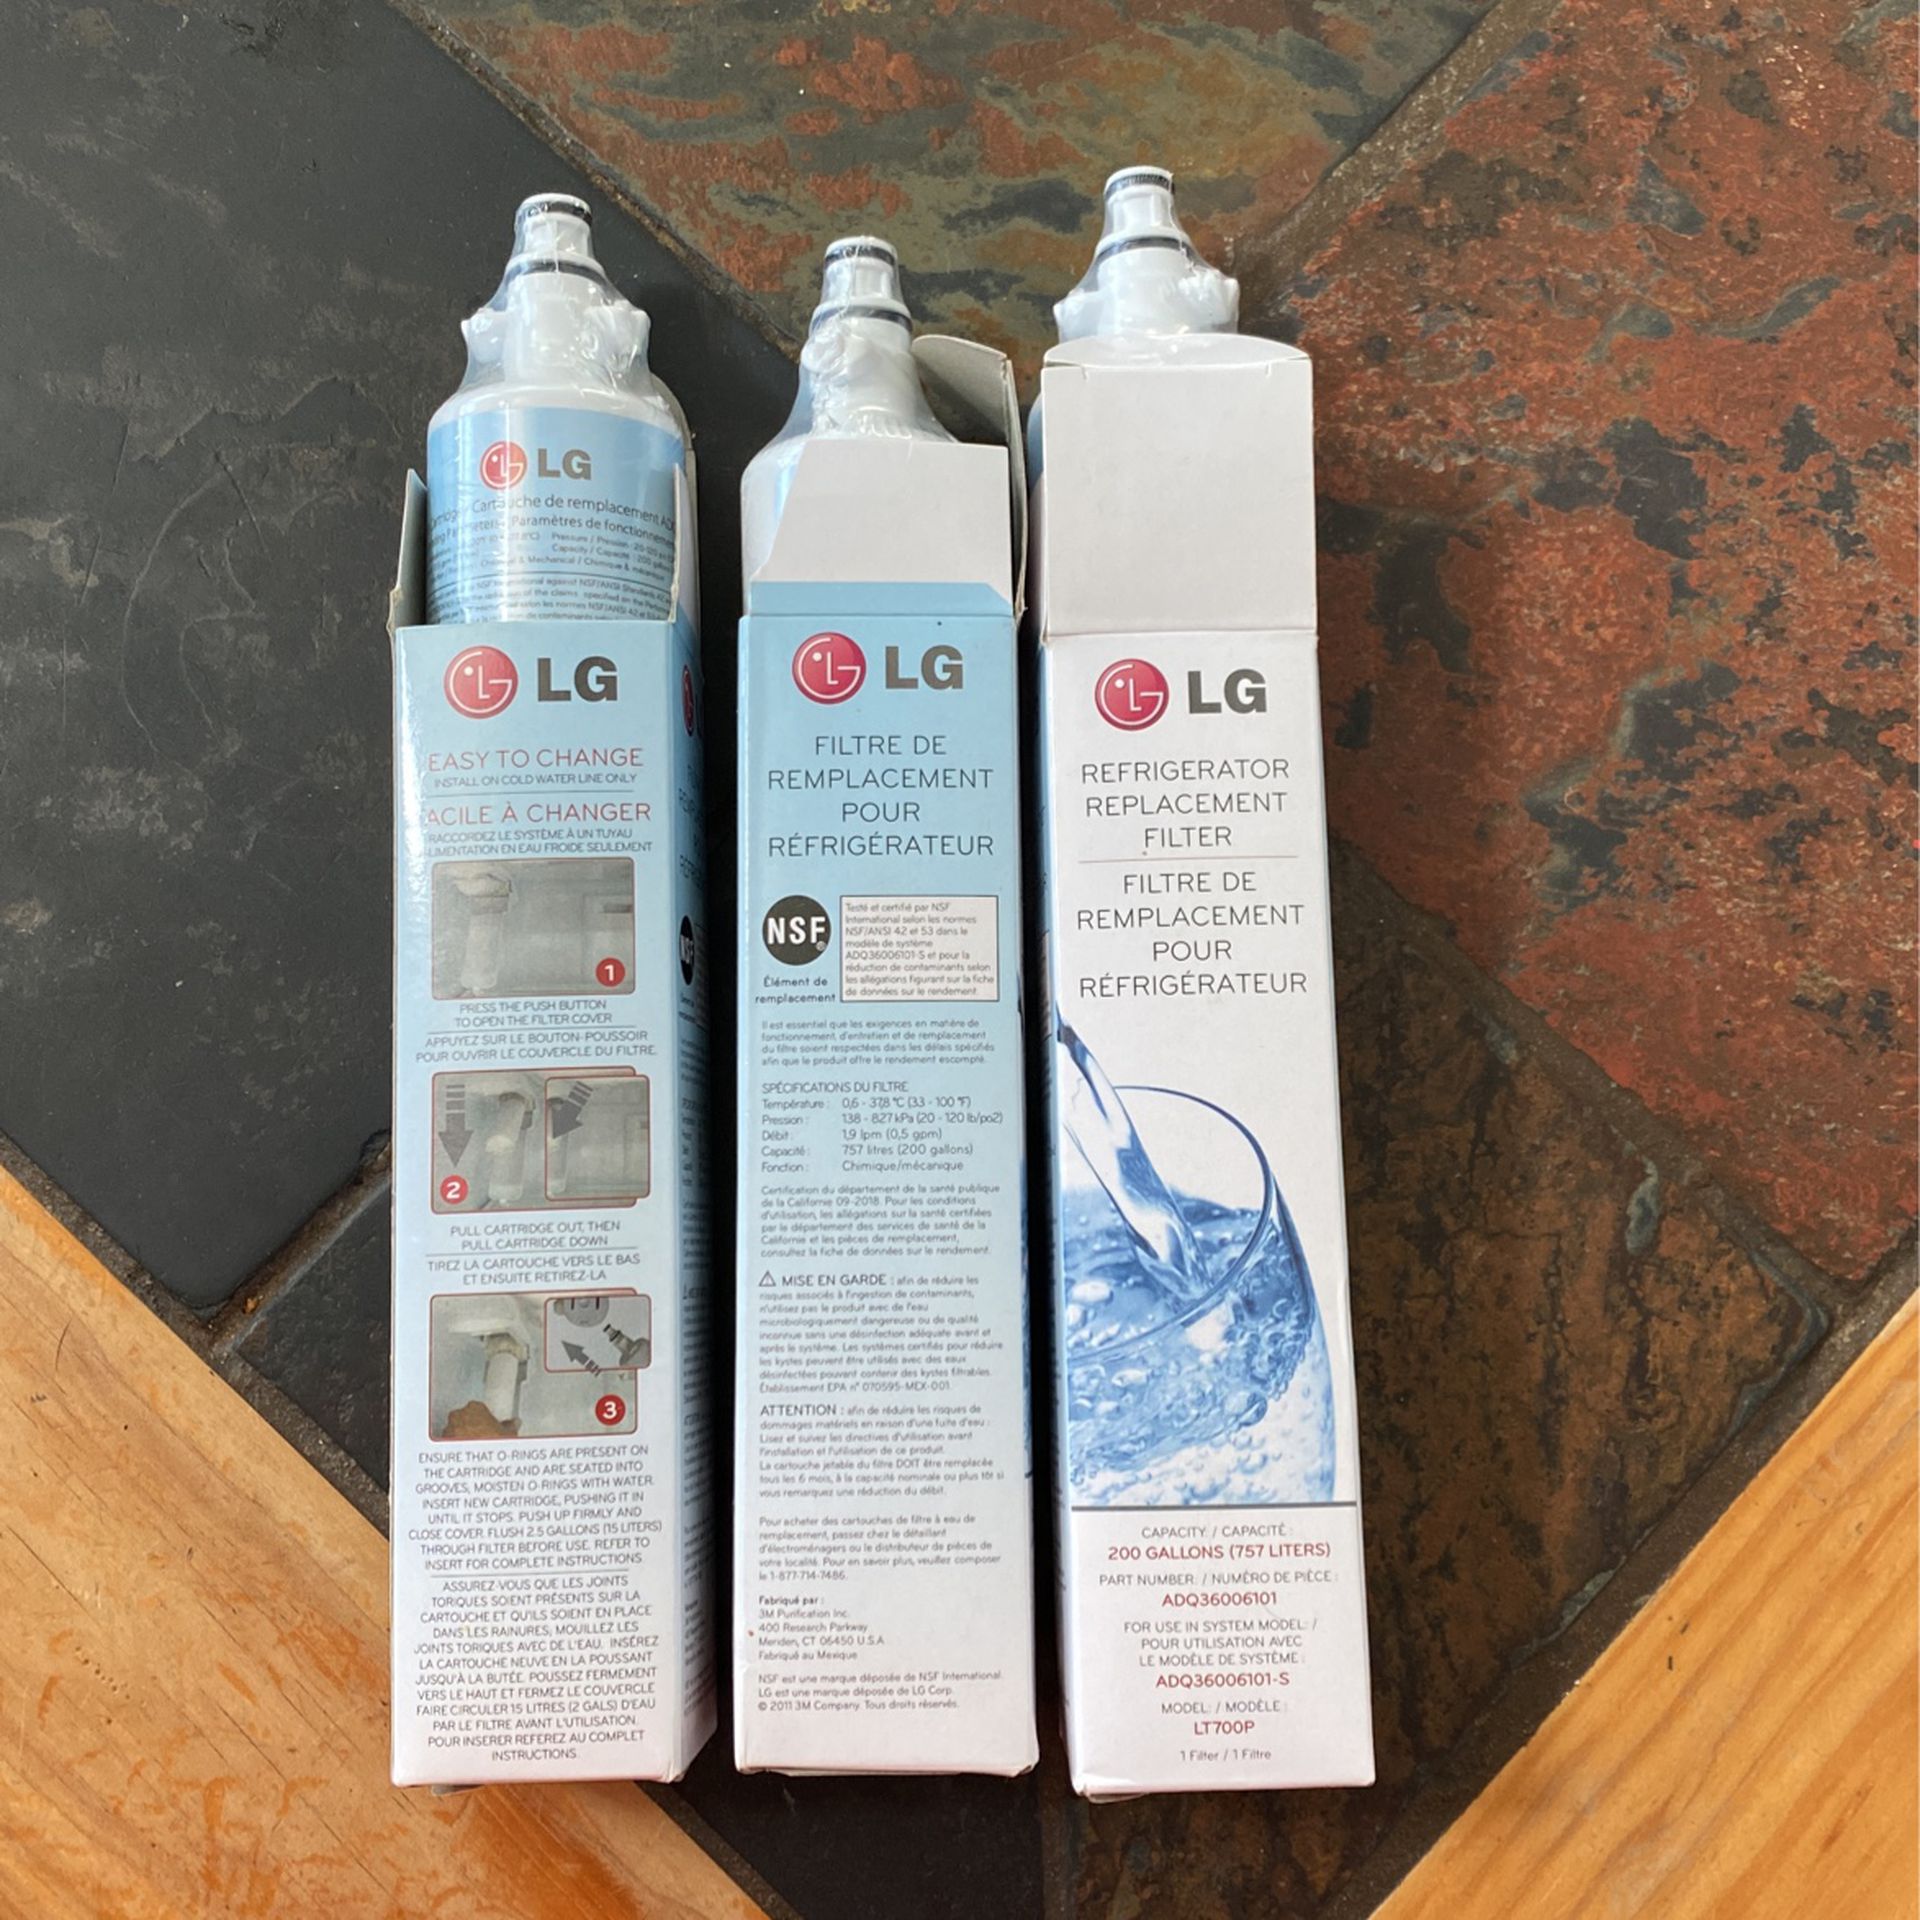 LG Refrigerator Water Filters #adq(contact info removed)1-s